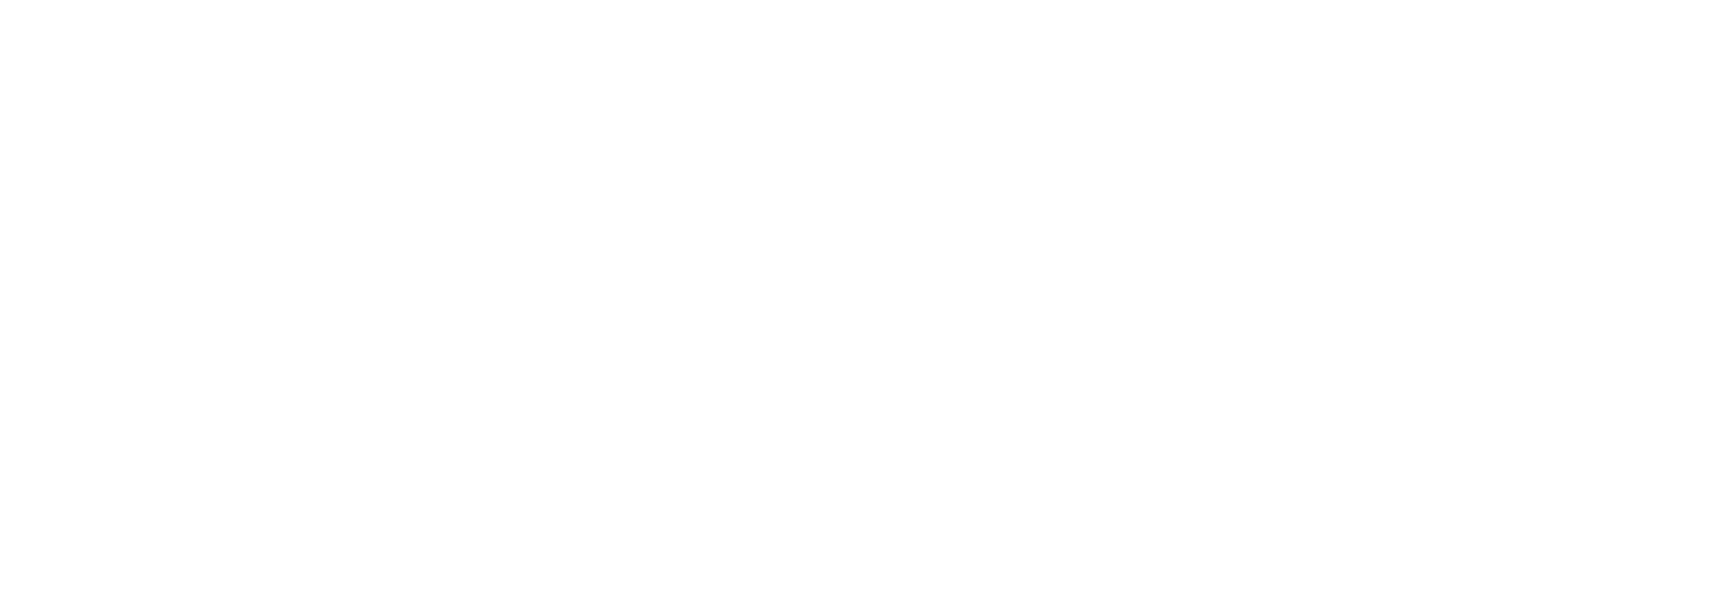 Students' Association Government logo in white